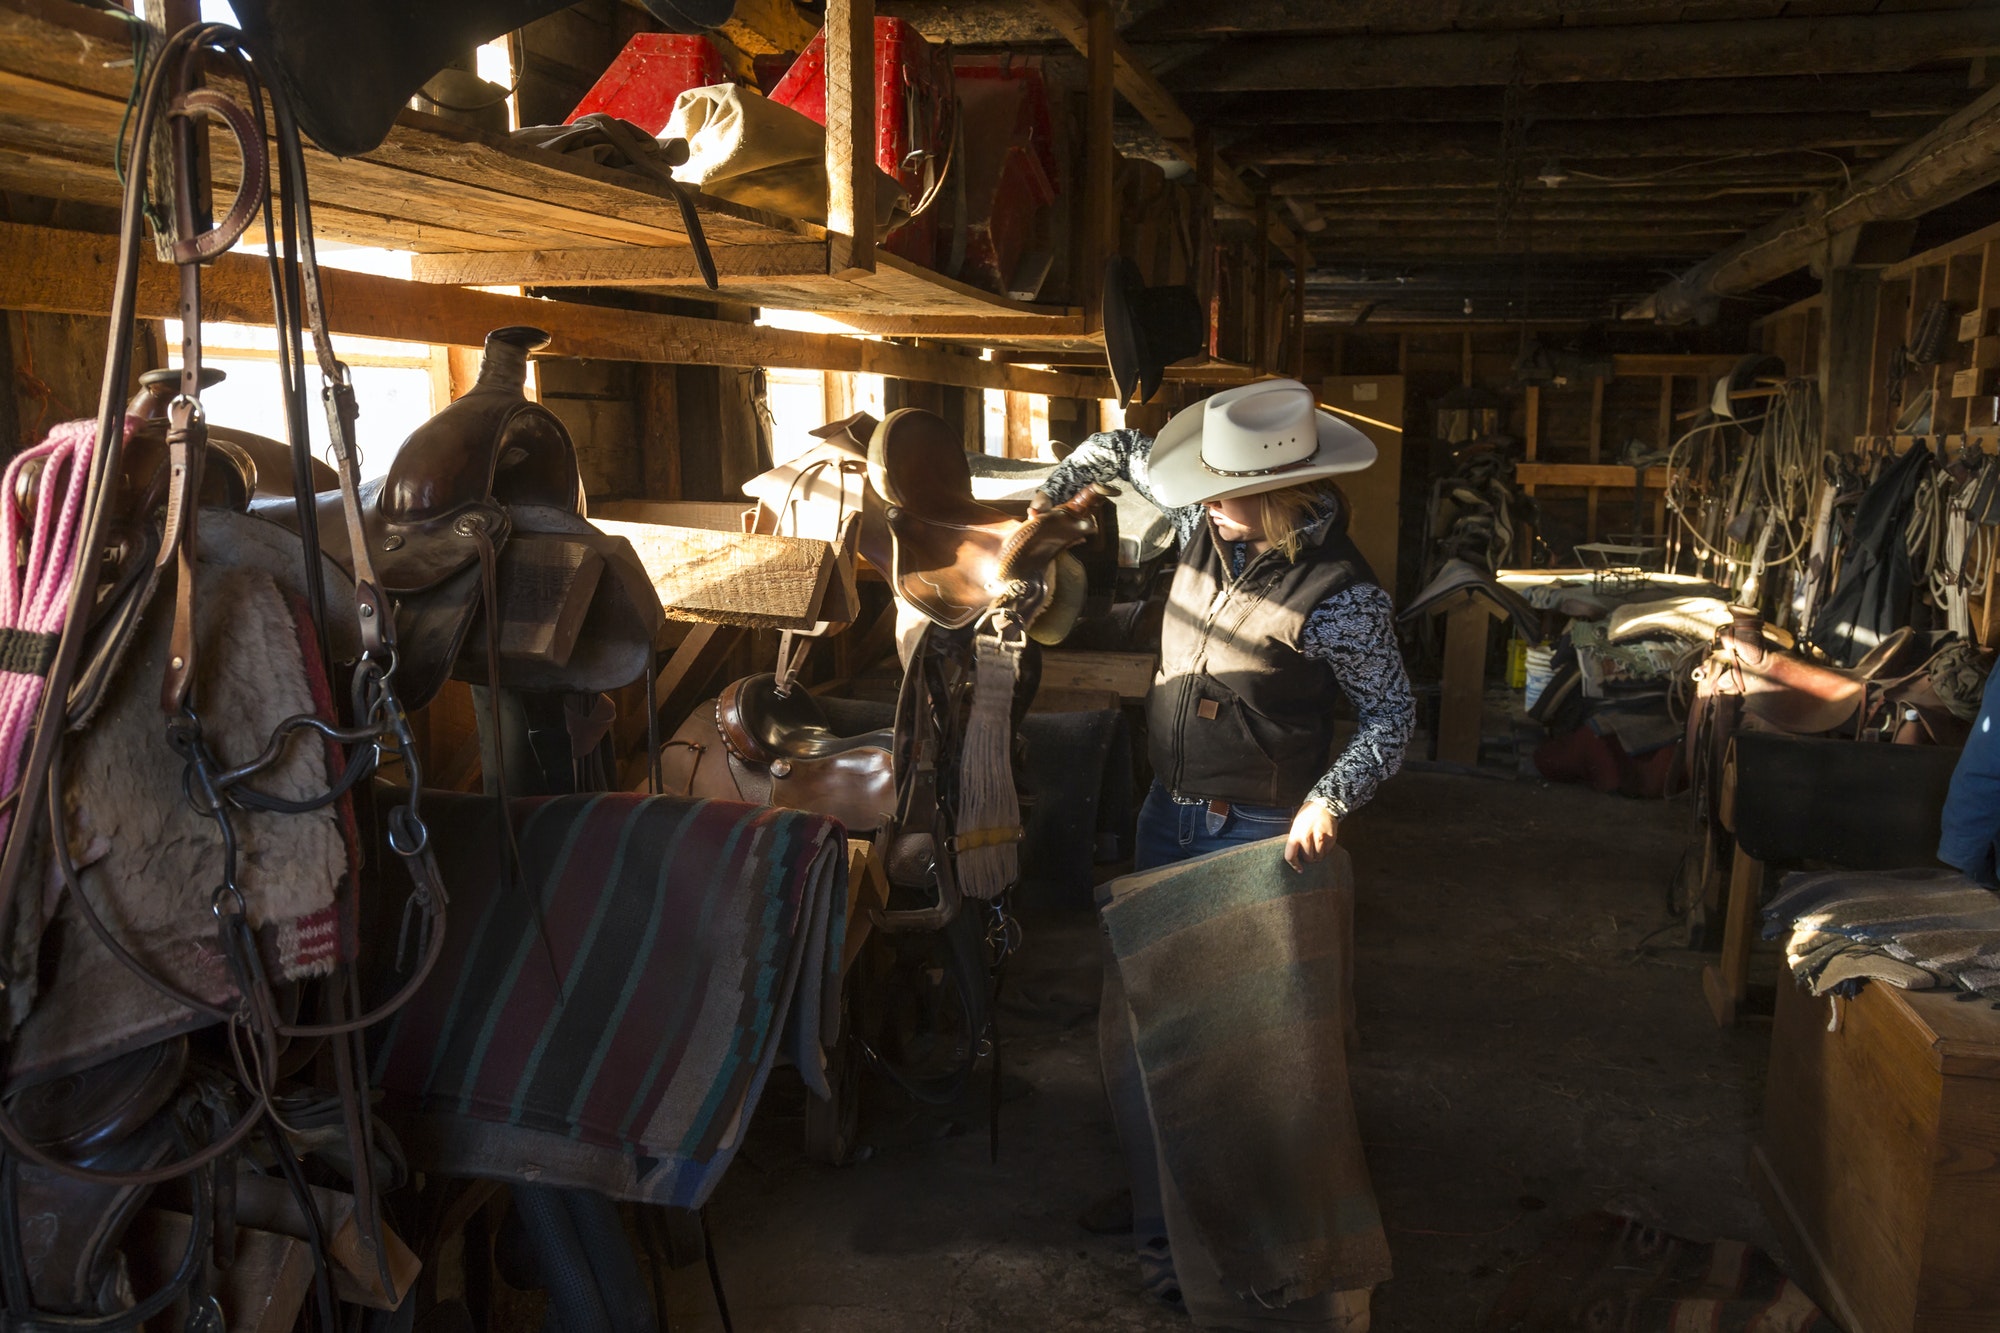 Cowboy standing in stable with racks of riding tack and saddles, holding leather saddle and striped